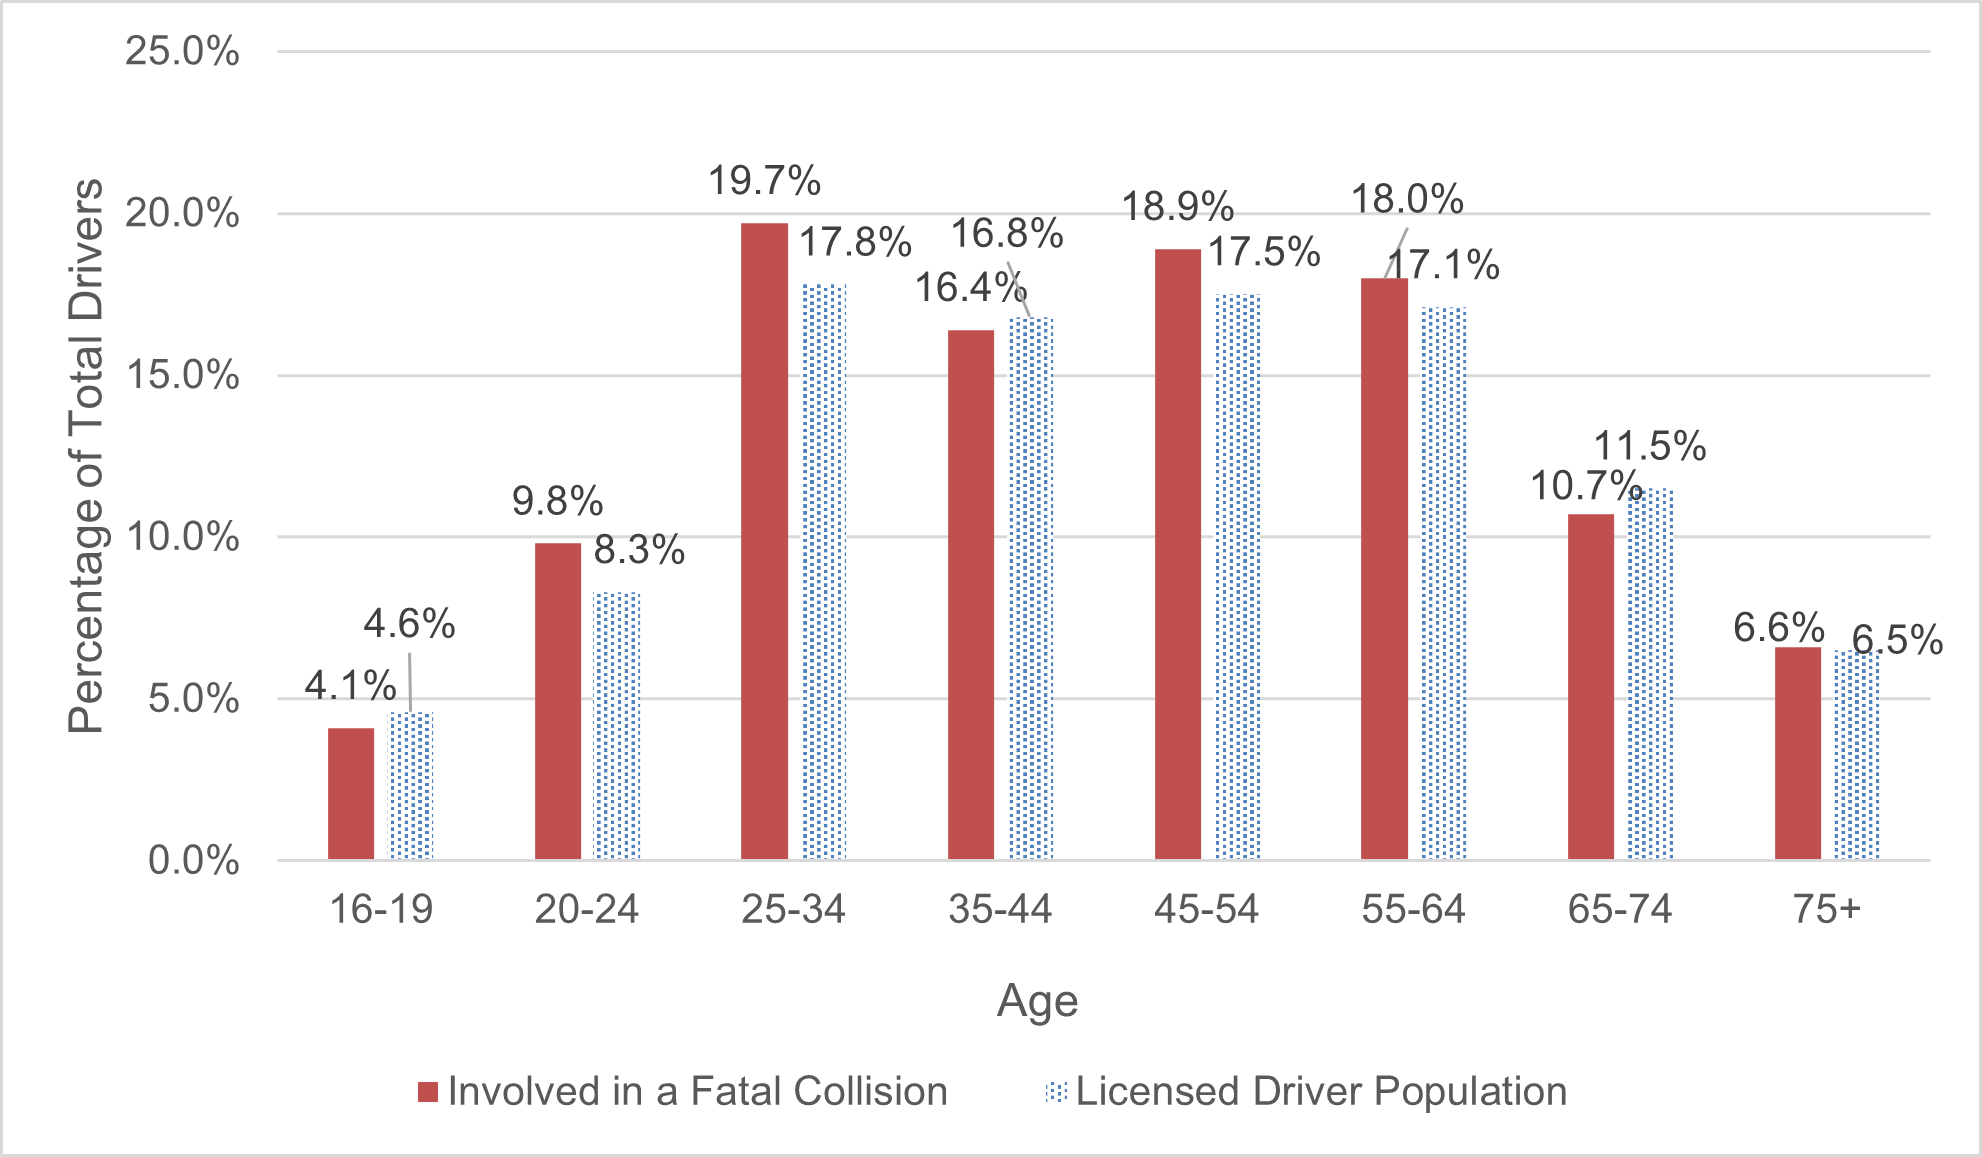 Figure 16 compares the percentage of the 128 drivers involved in fatal collisions by age group to licenced drivers in each age group. 